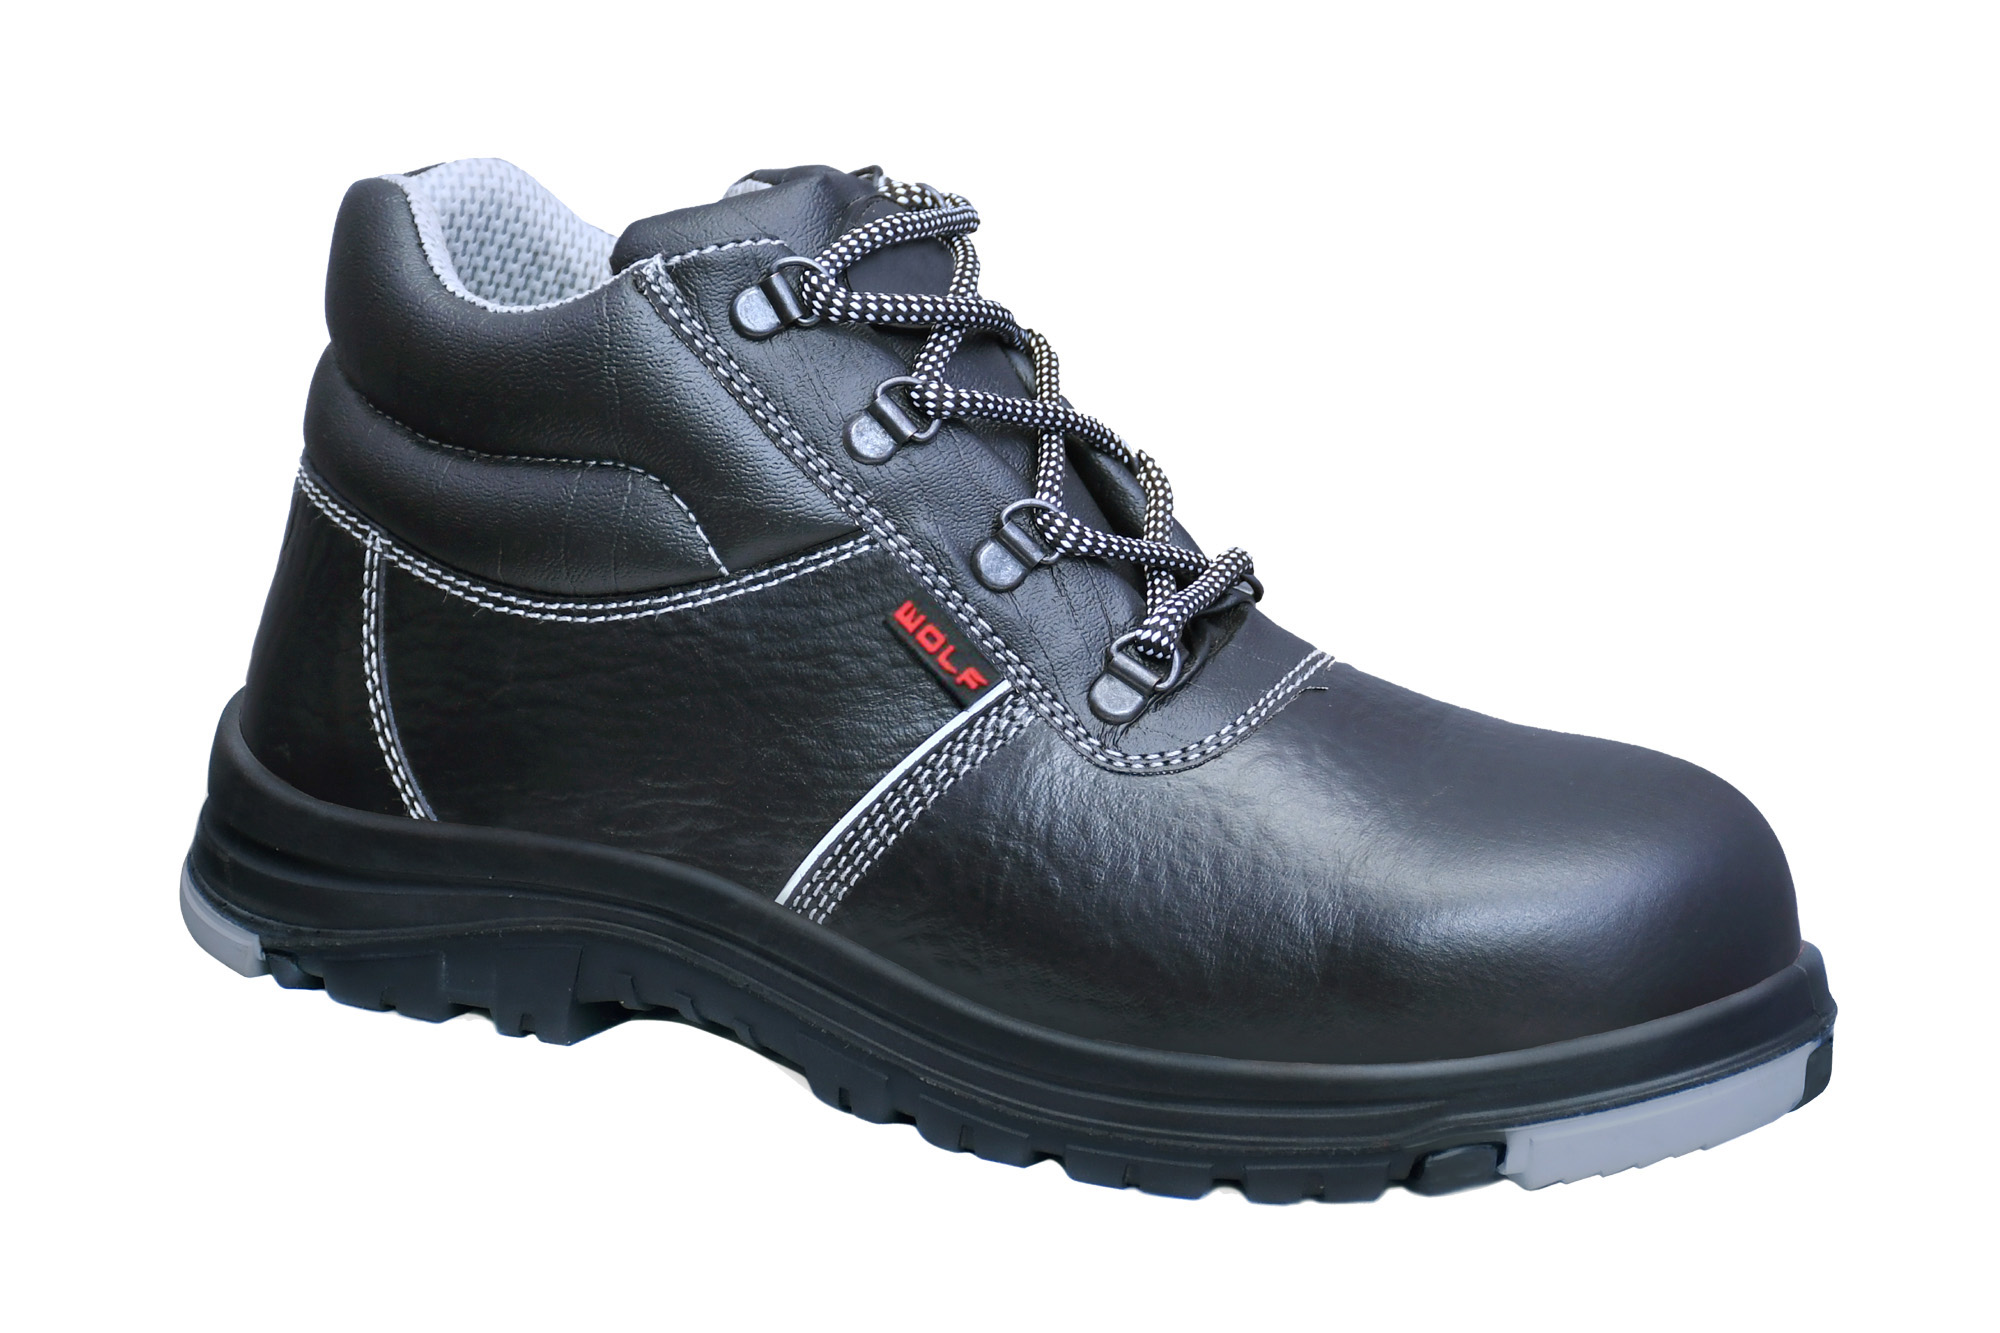 Double Density PU/Rubber Safety Boot